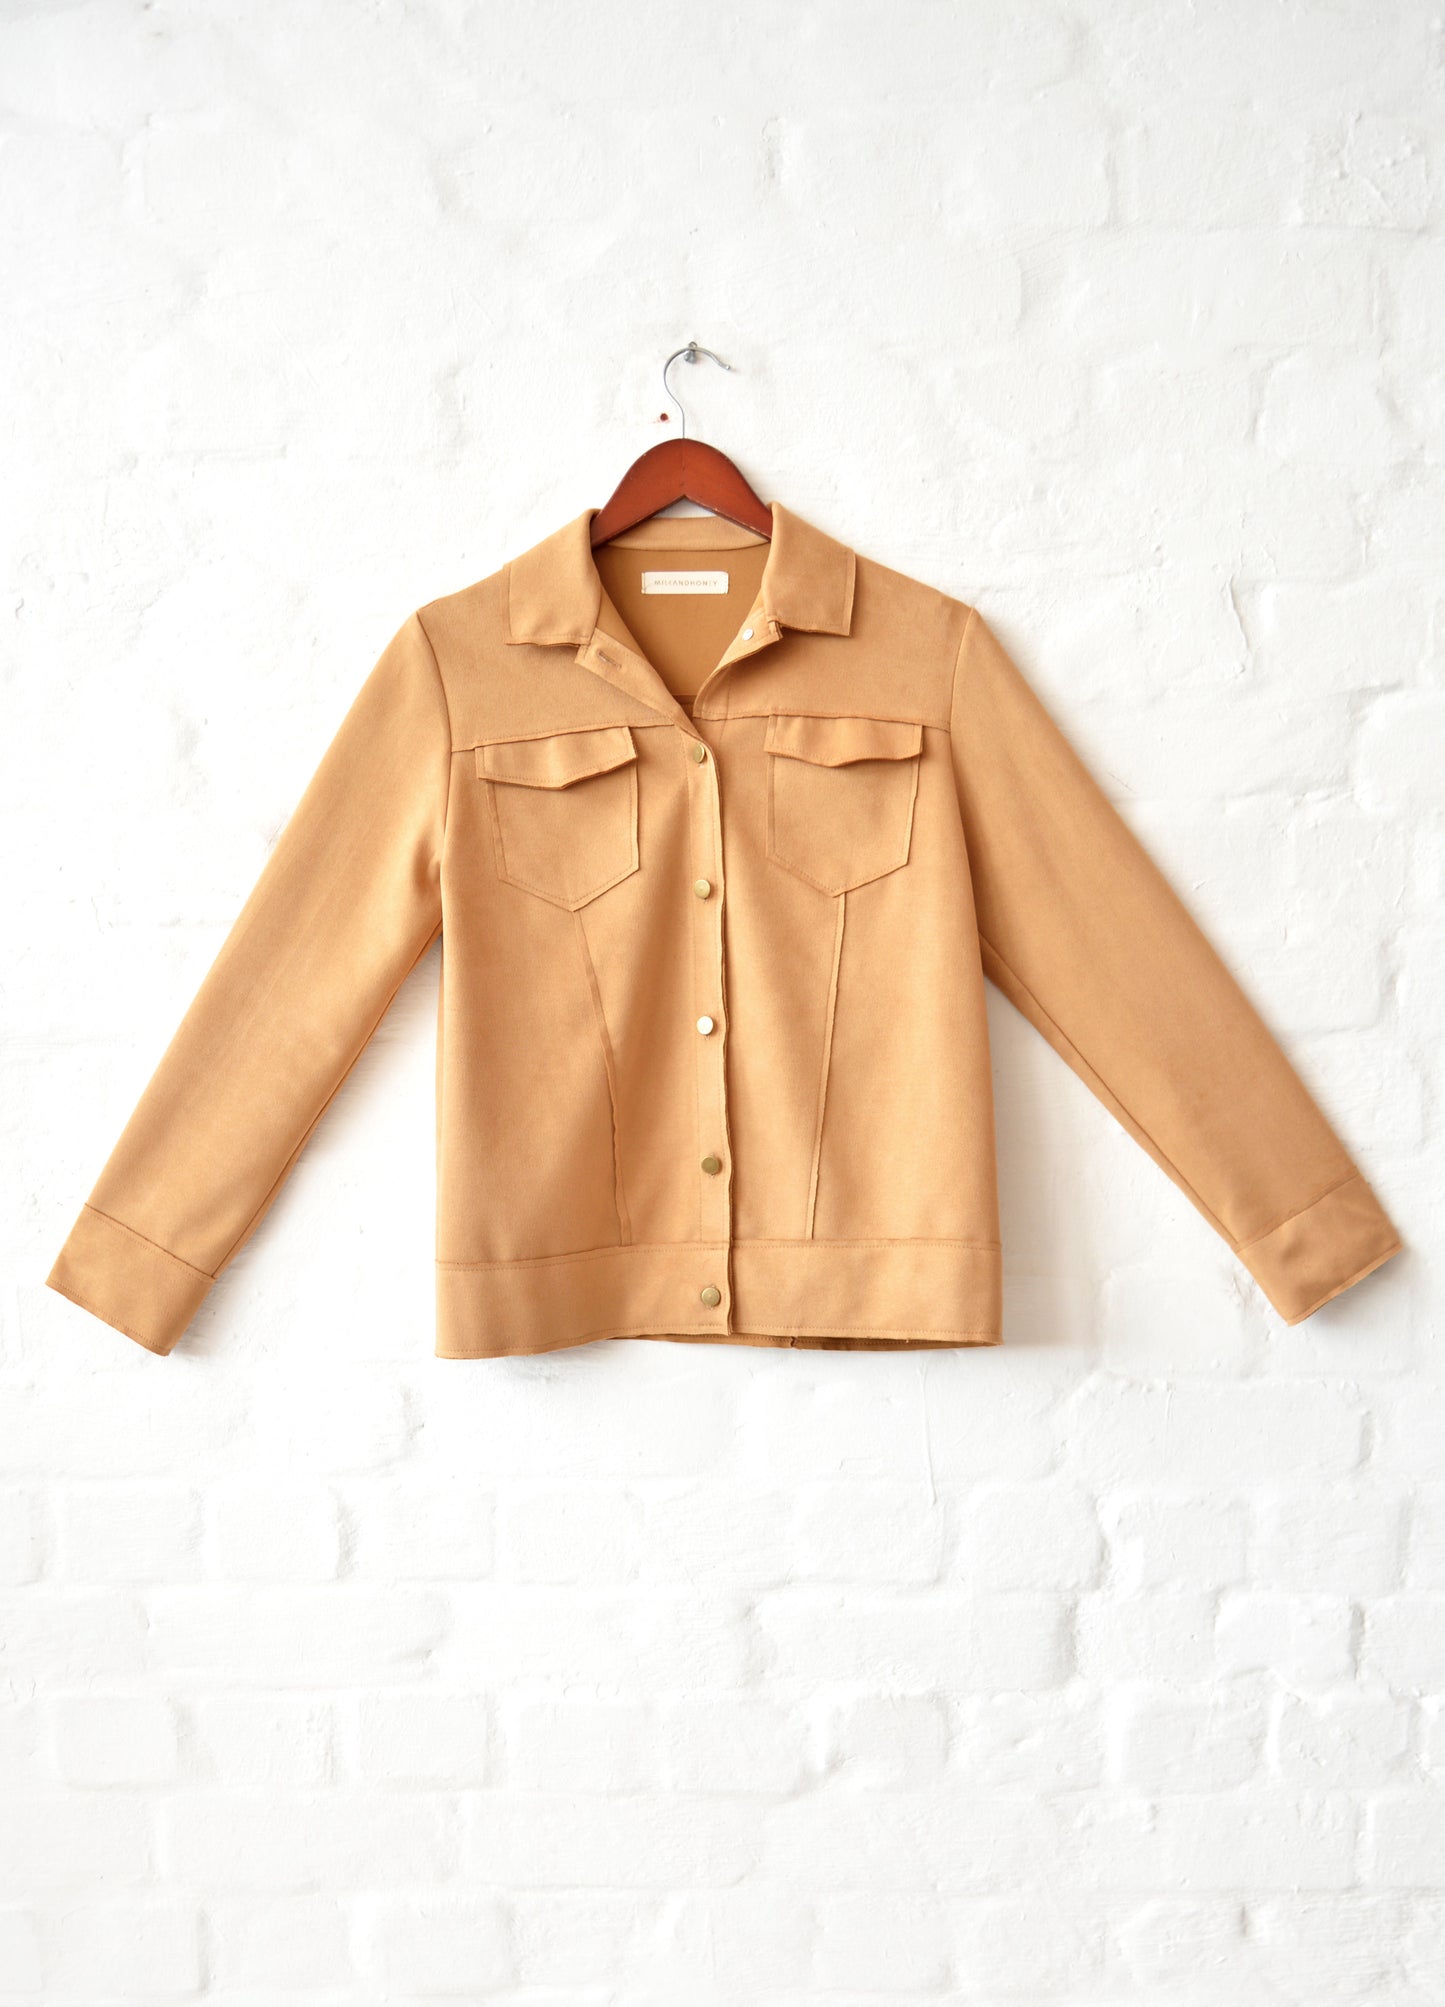 Max denim-style jacket in Amber